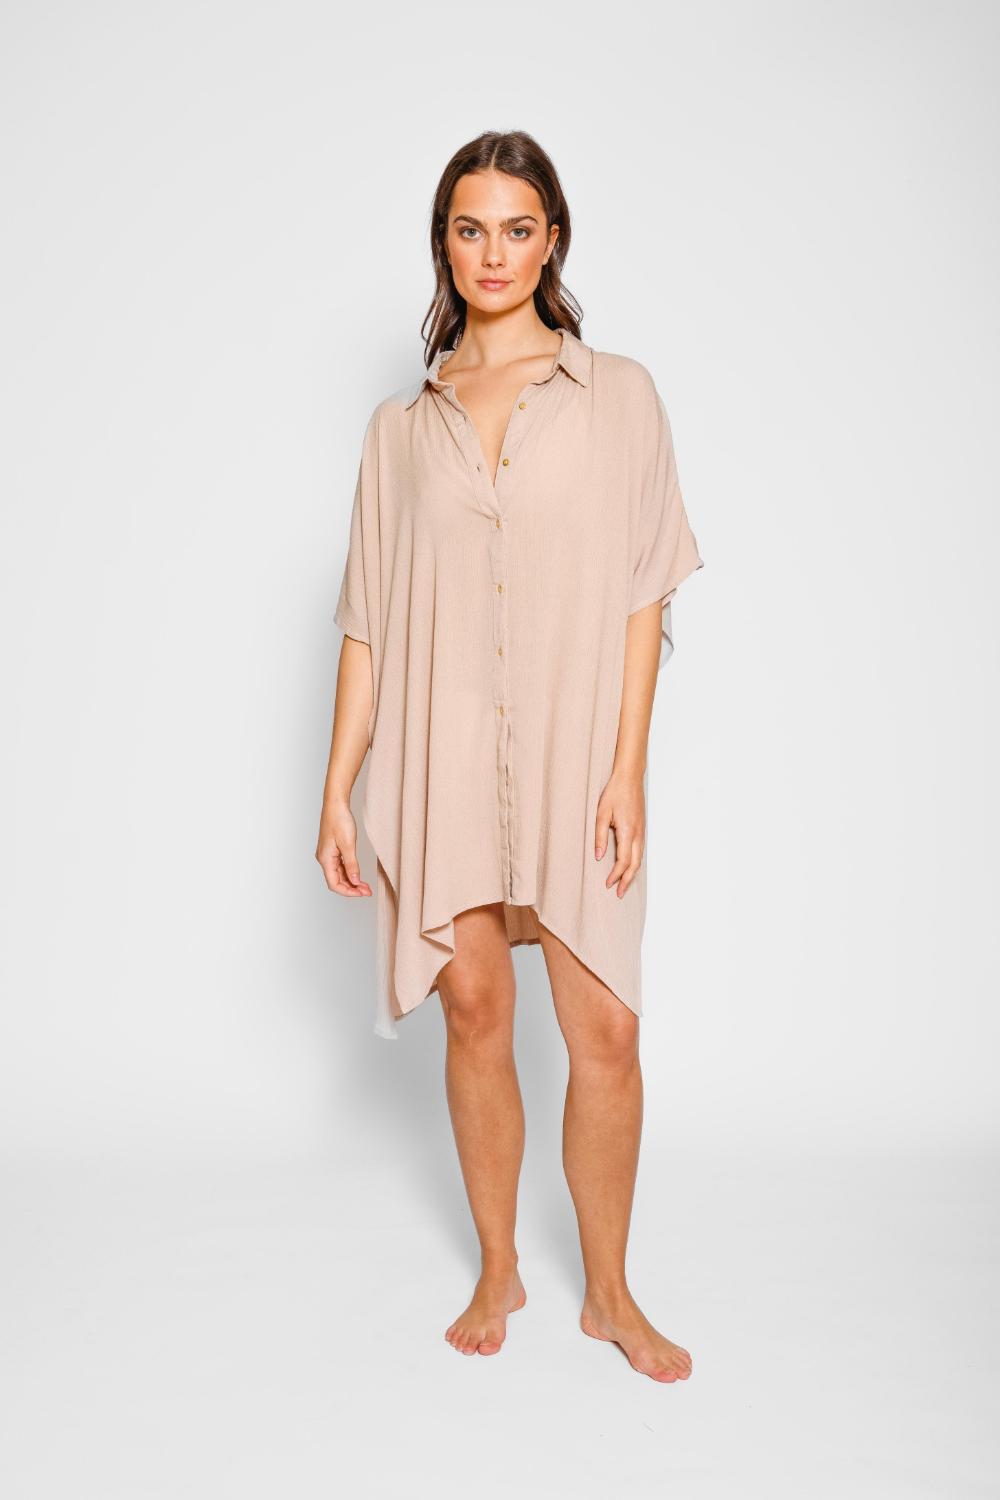 a front shot of a woman in a oversized beige flowy shirt dress with one hand on her hair being confident